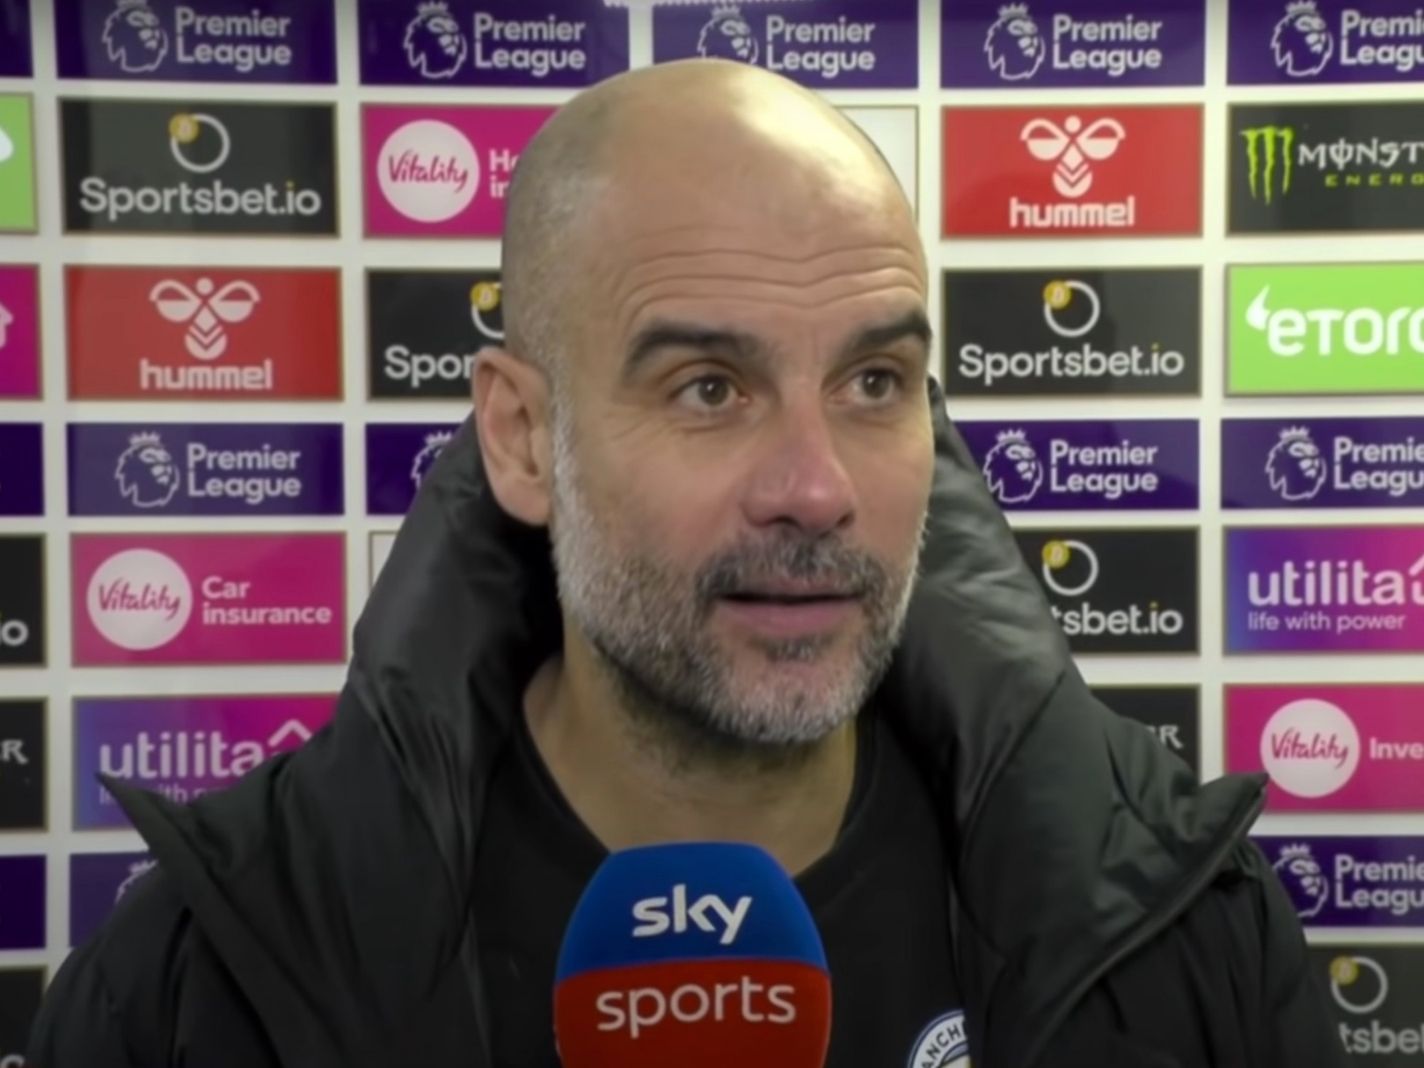 Pep Guardiola giving post-match interview